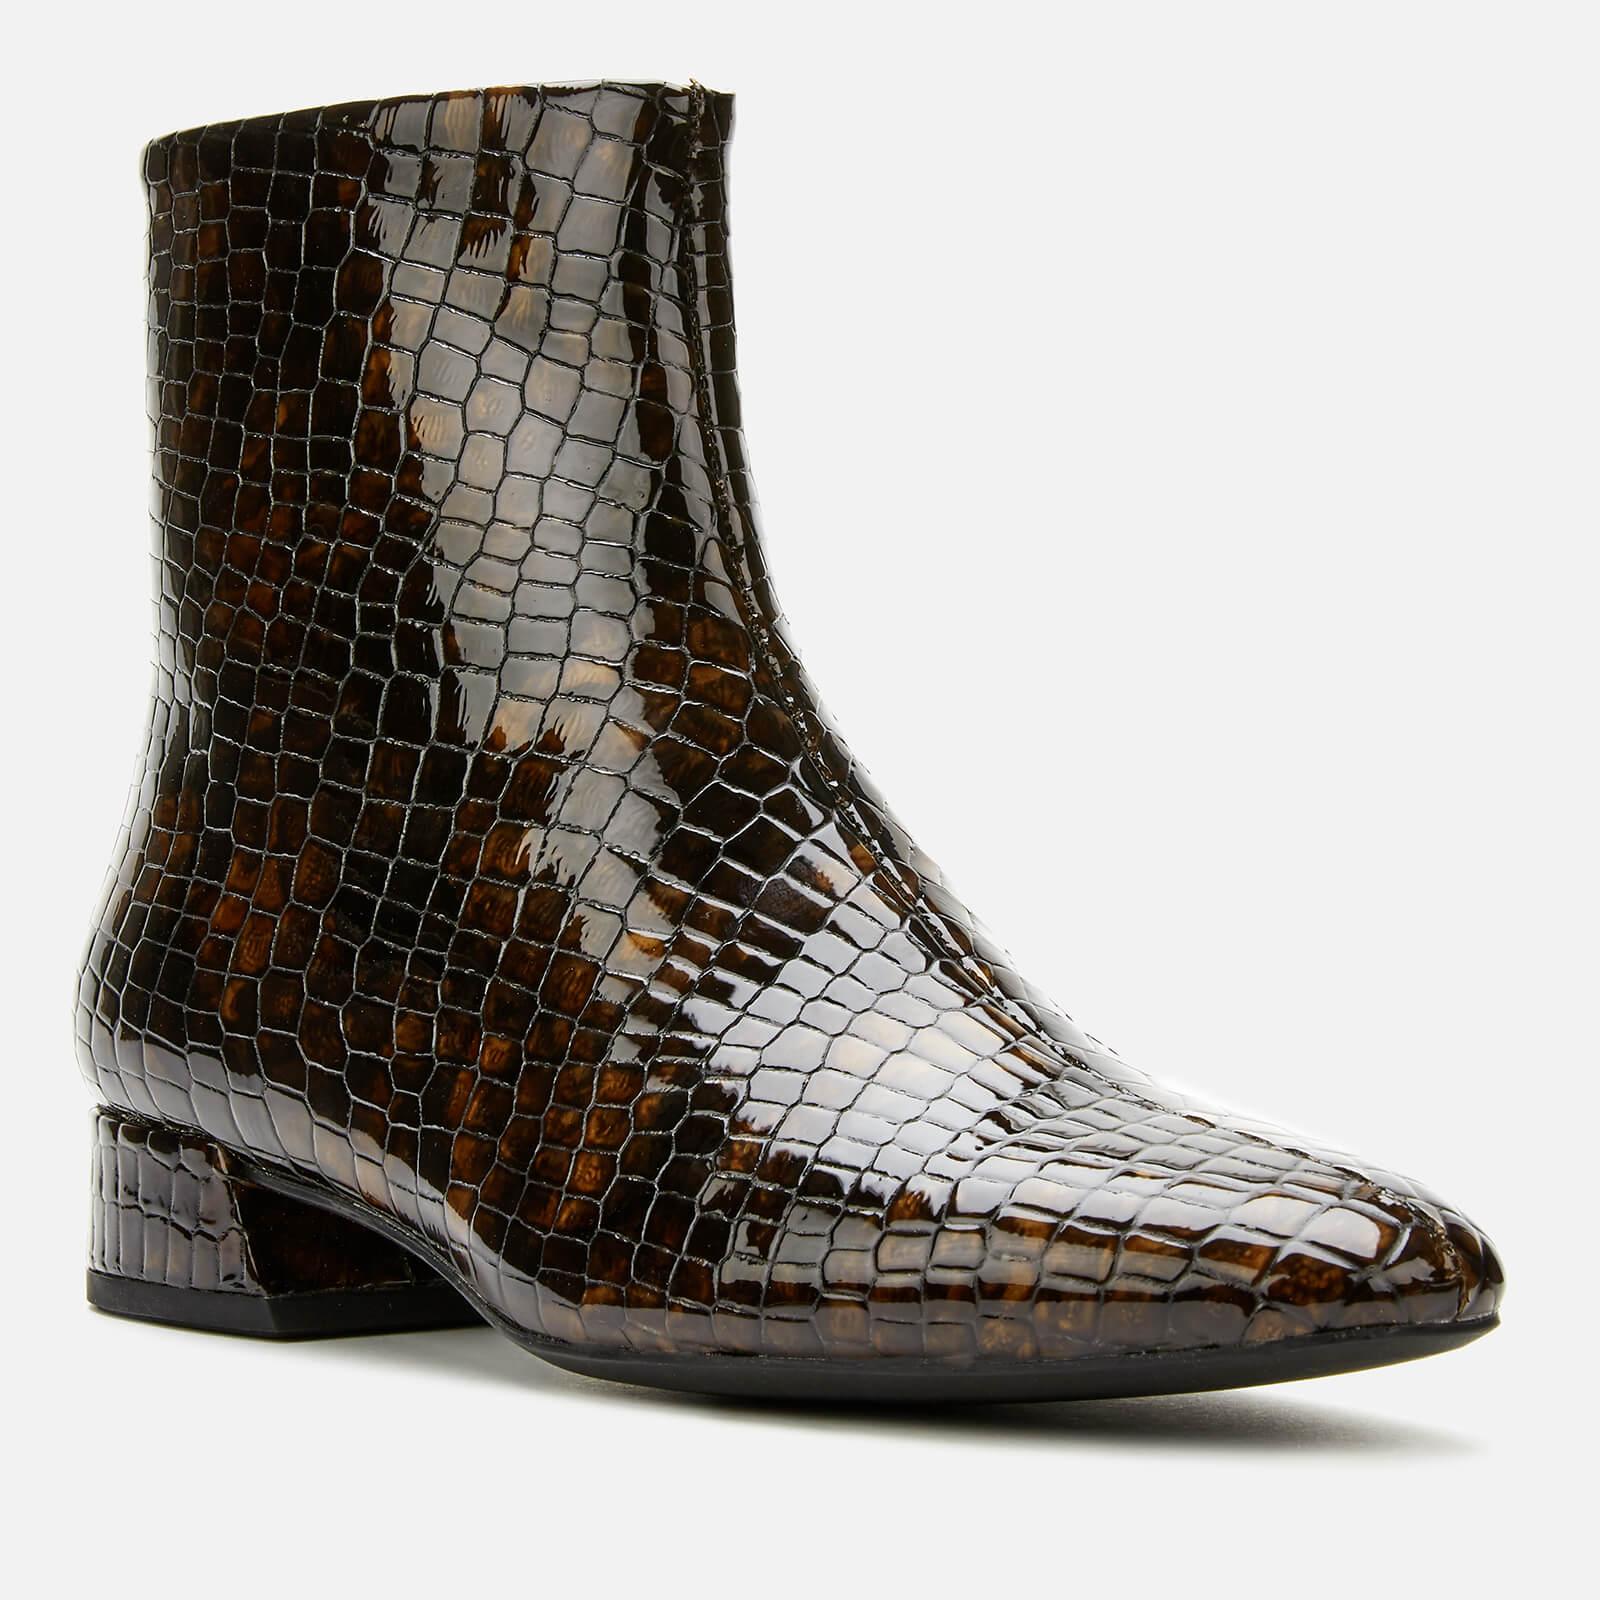 Vagabond Shoemakers Joyce Embossed Leather Ankle Boots in Brown | Lyst  Canada